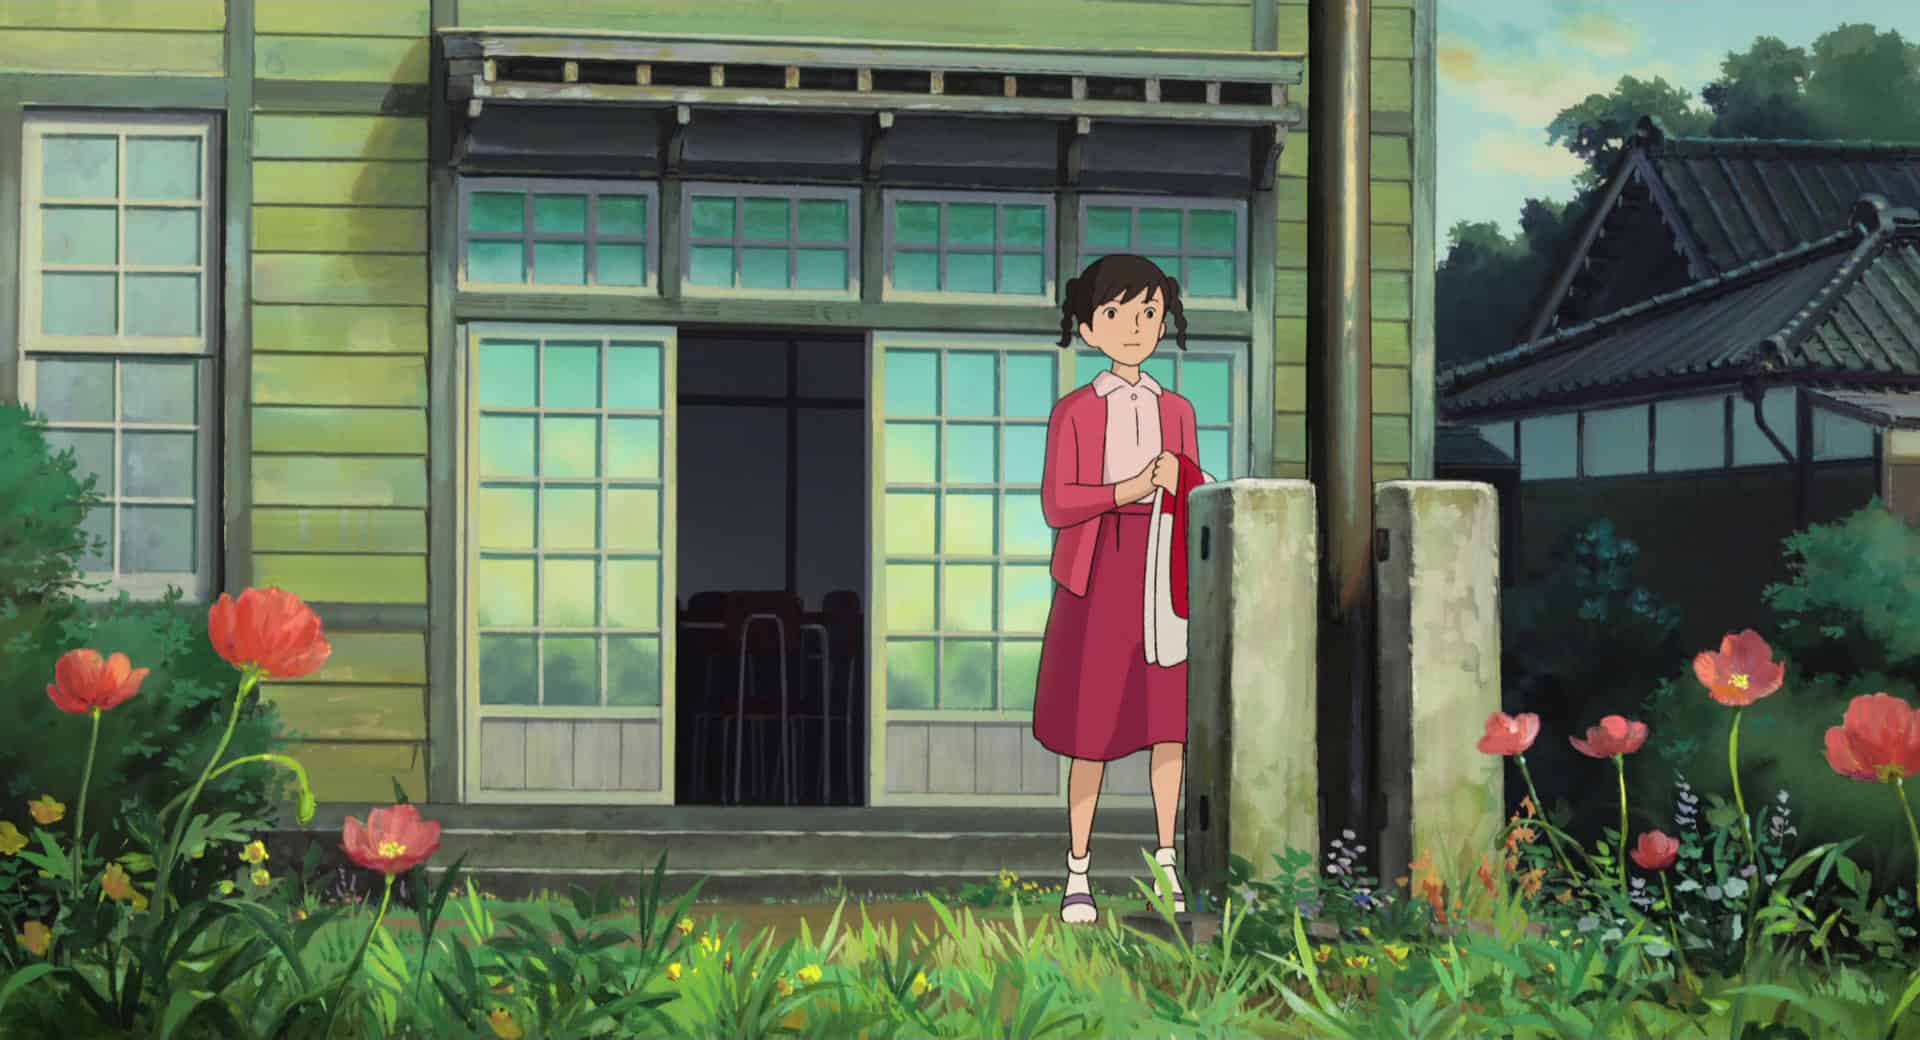 An animated girl standing next to a flagpole in this image from Studio Ghibli.